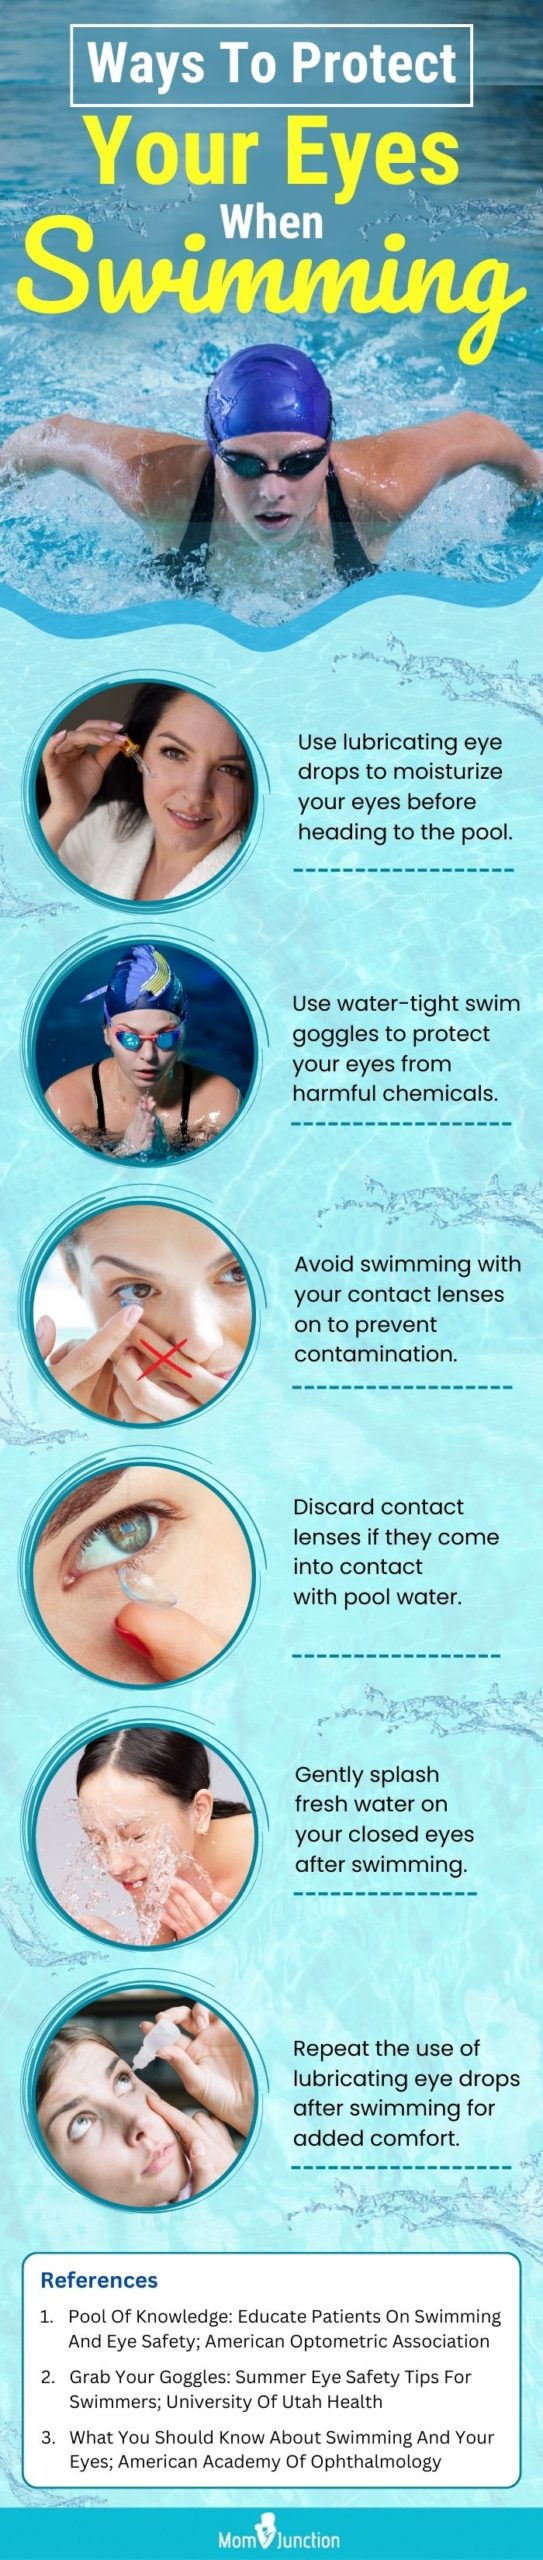 Ways To Protect Your Eyes When Swimming (infographic)